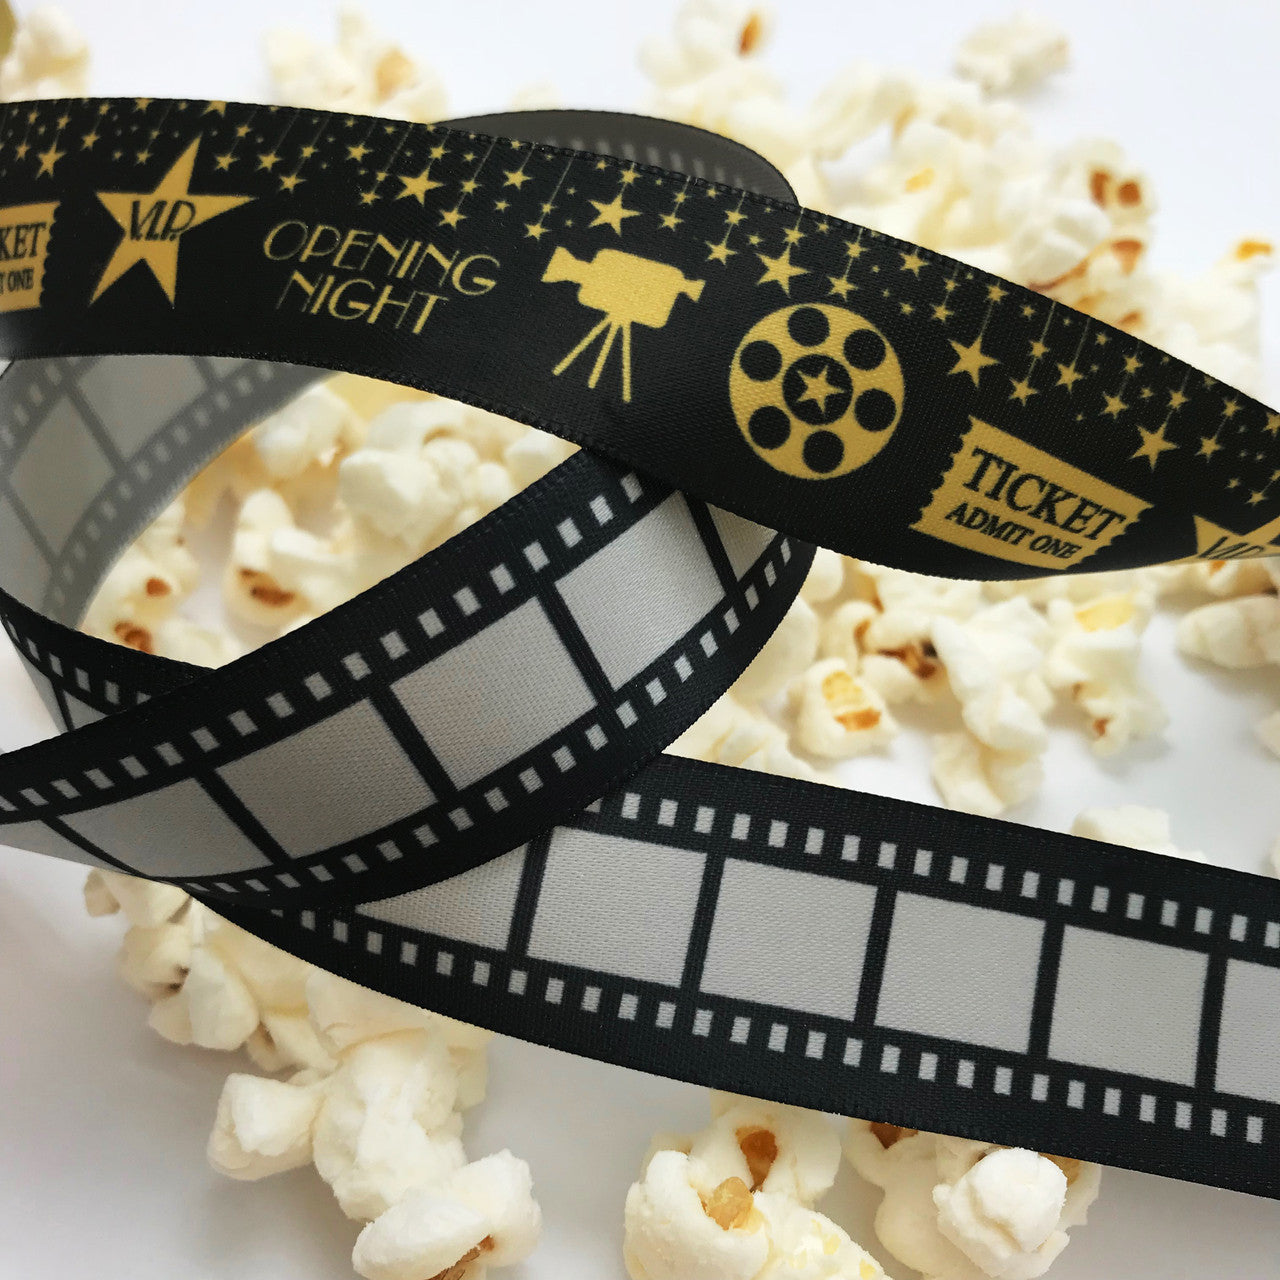 Paired with our film ribbon, these make the best Movie themed party ribbons ever!